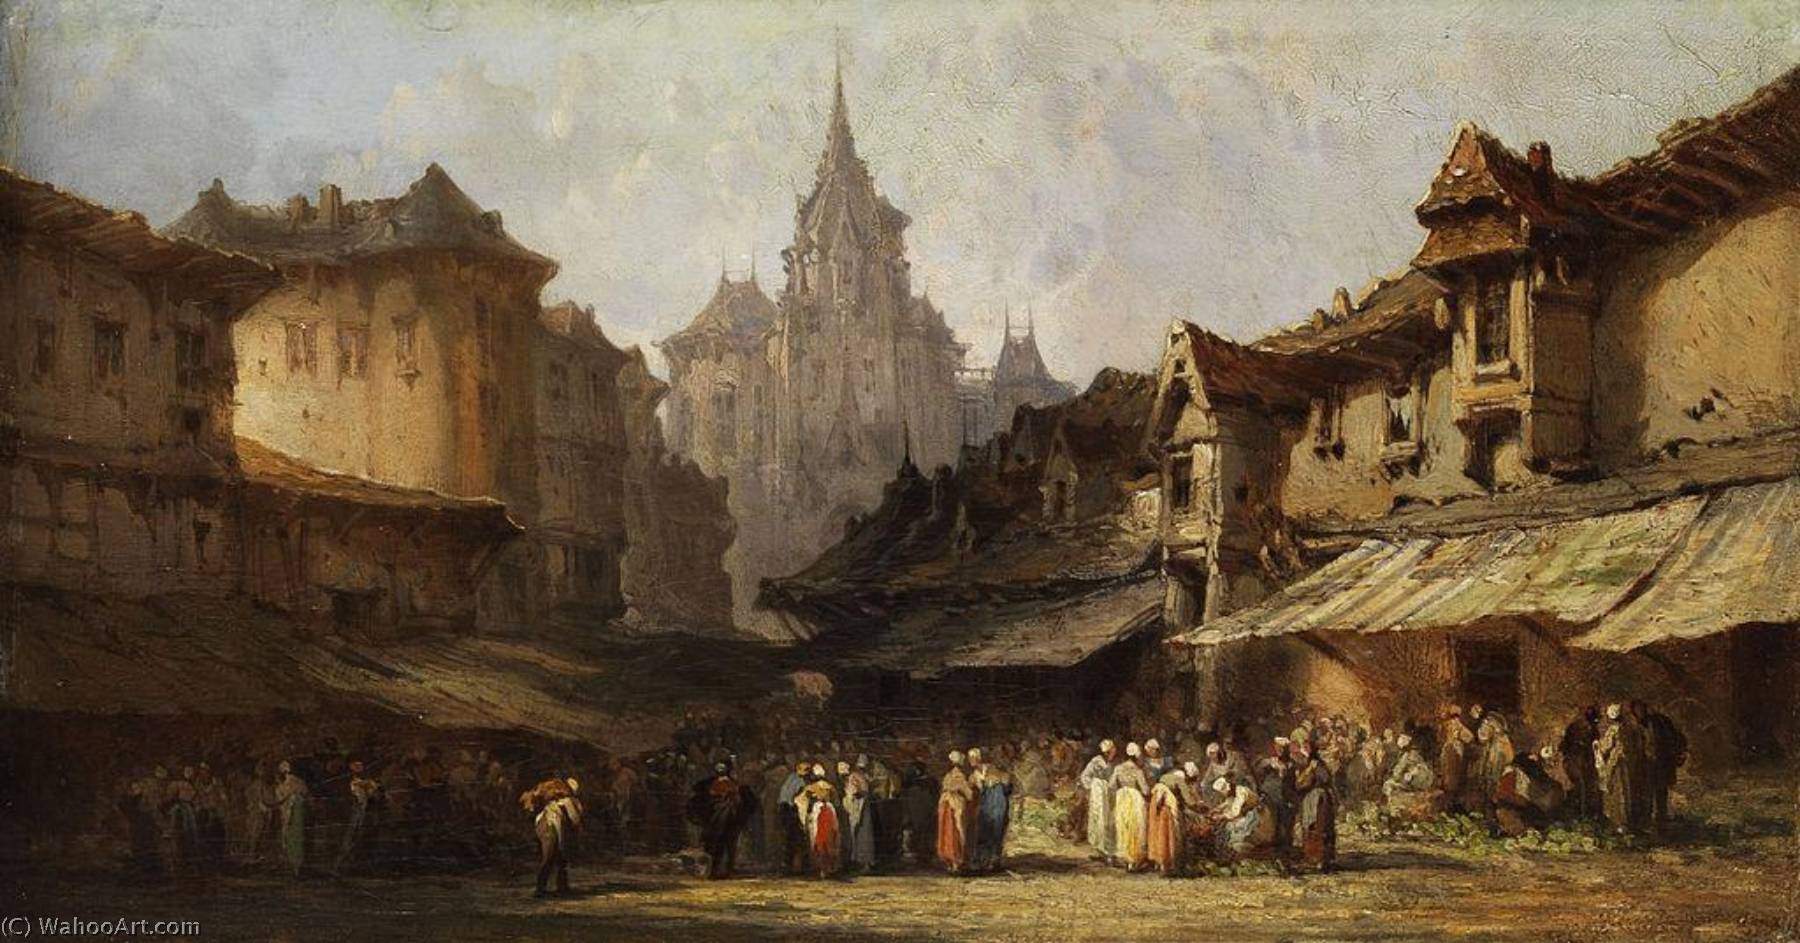 WikiOO.org - 백과 사전 - 회화, 삽화 Louis Gabriel Eugène Isabey - Market Place in a Small Town